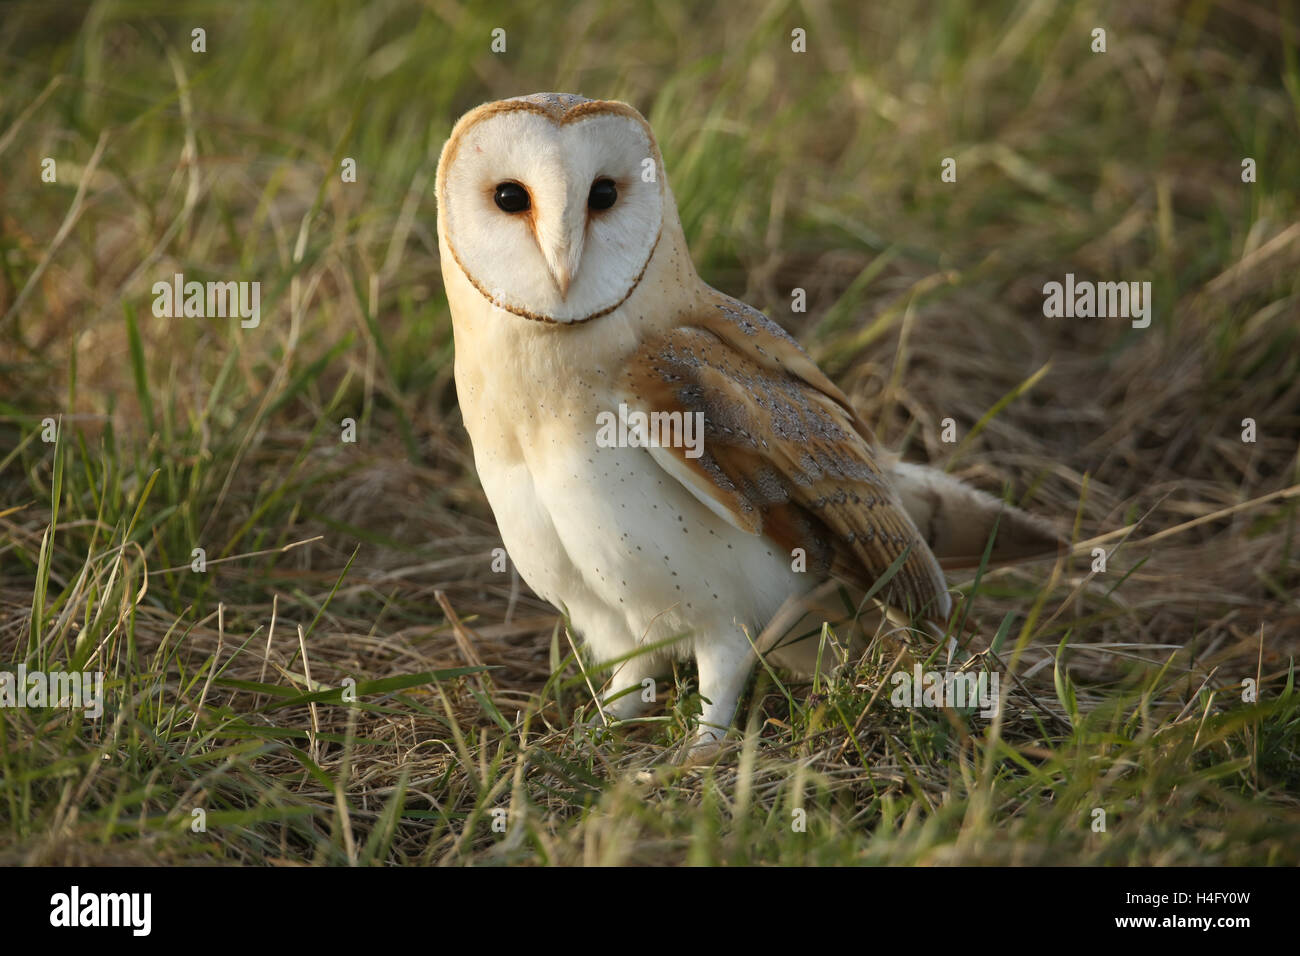 A Hunting Barn Owl (Tyto alba) resting in the grass after failing to catch its prey. Stock Photo